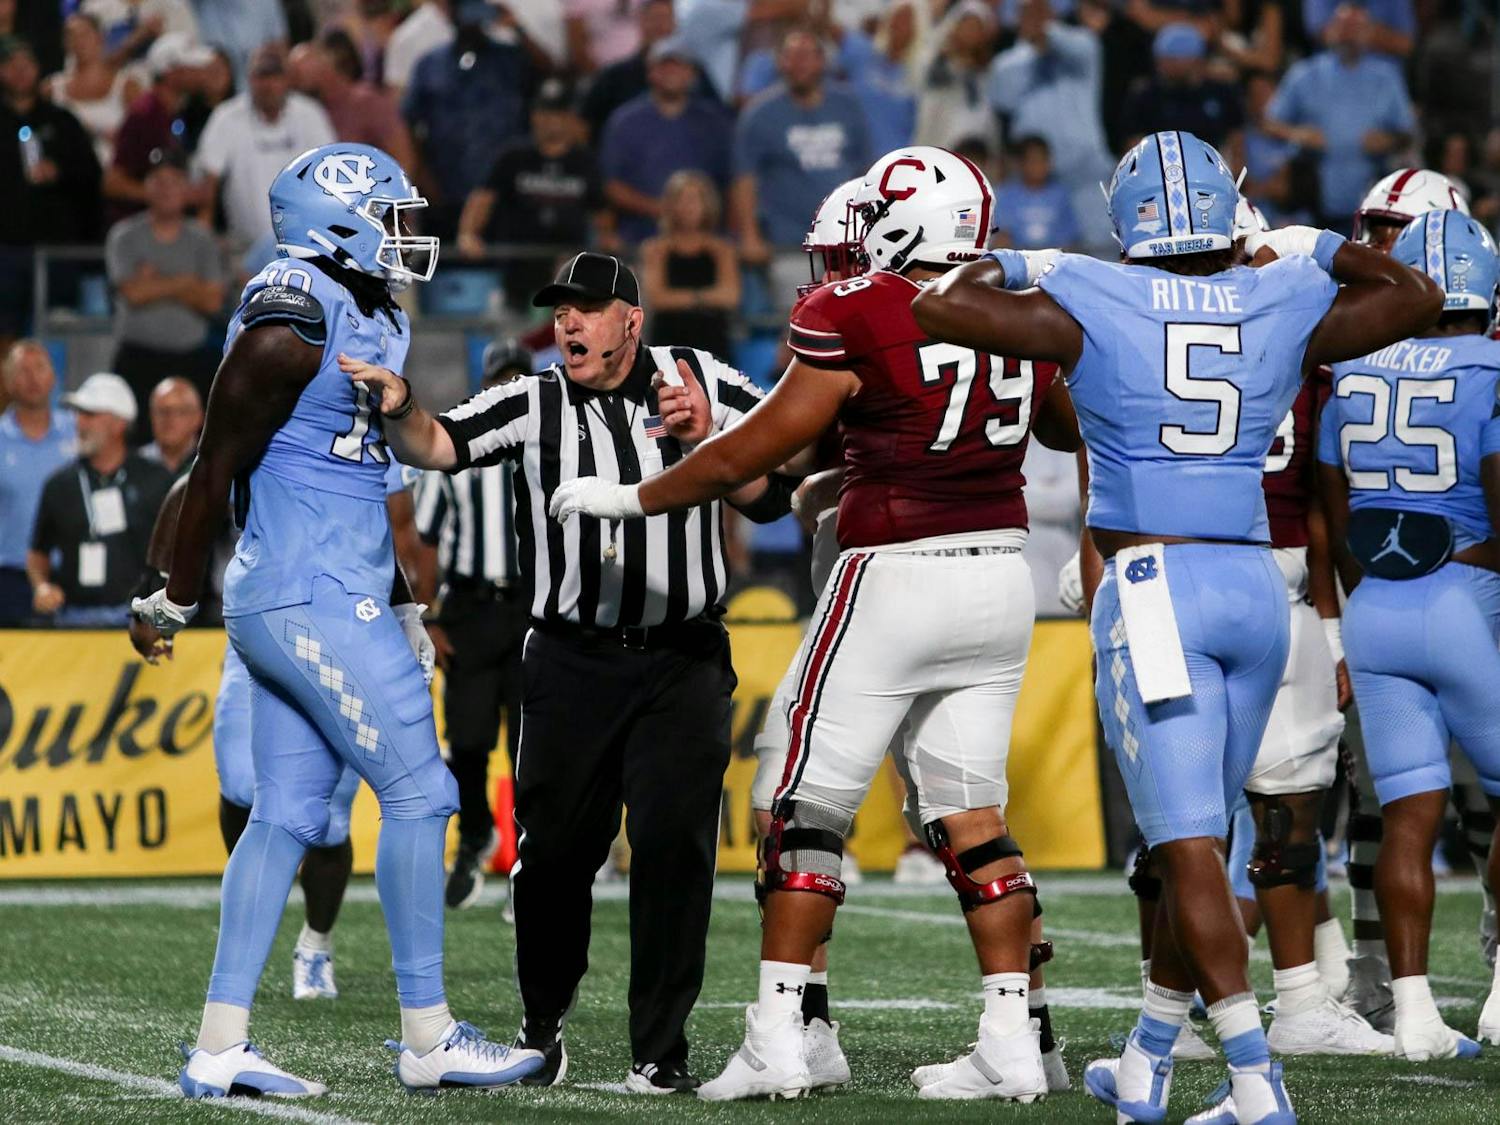 A referee breaks up an argument between players on the University of South Carolina and University of North Carolina football teams. North Carolina now leads the overall series between the two teams 36-20-4.